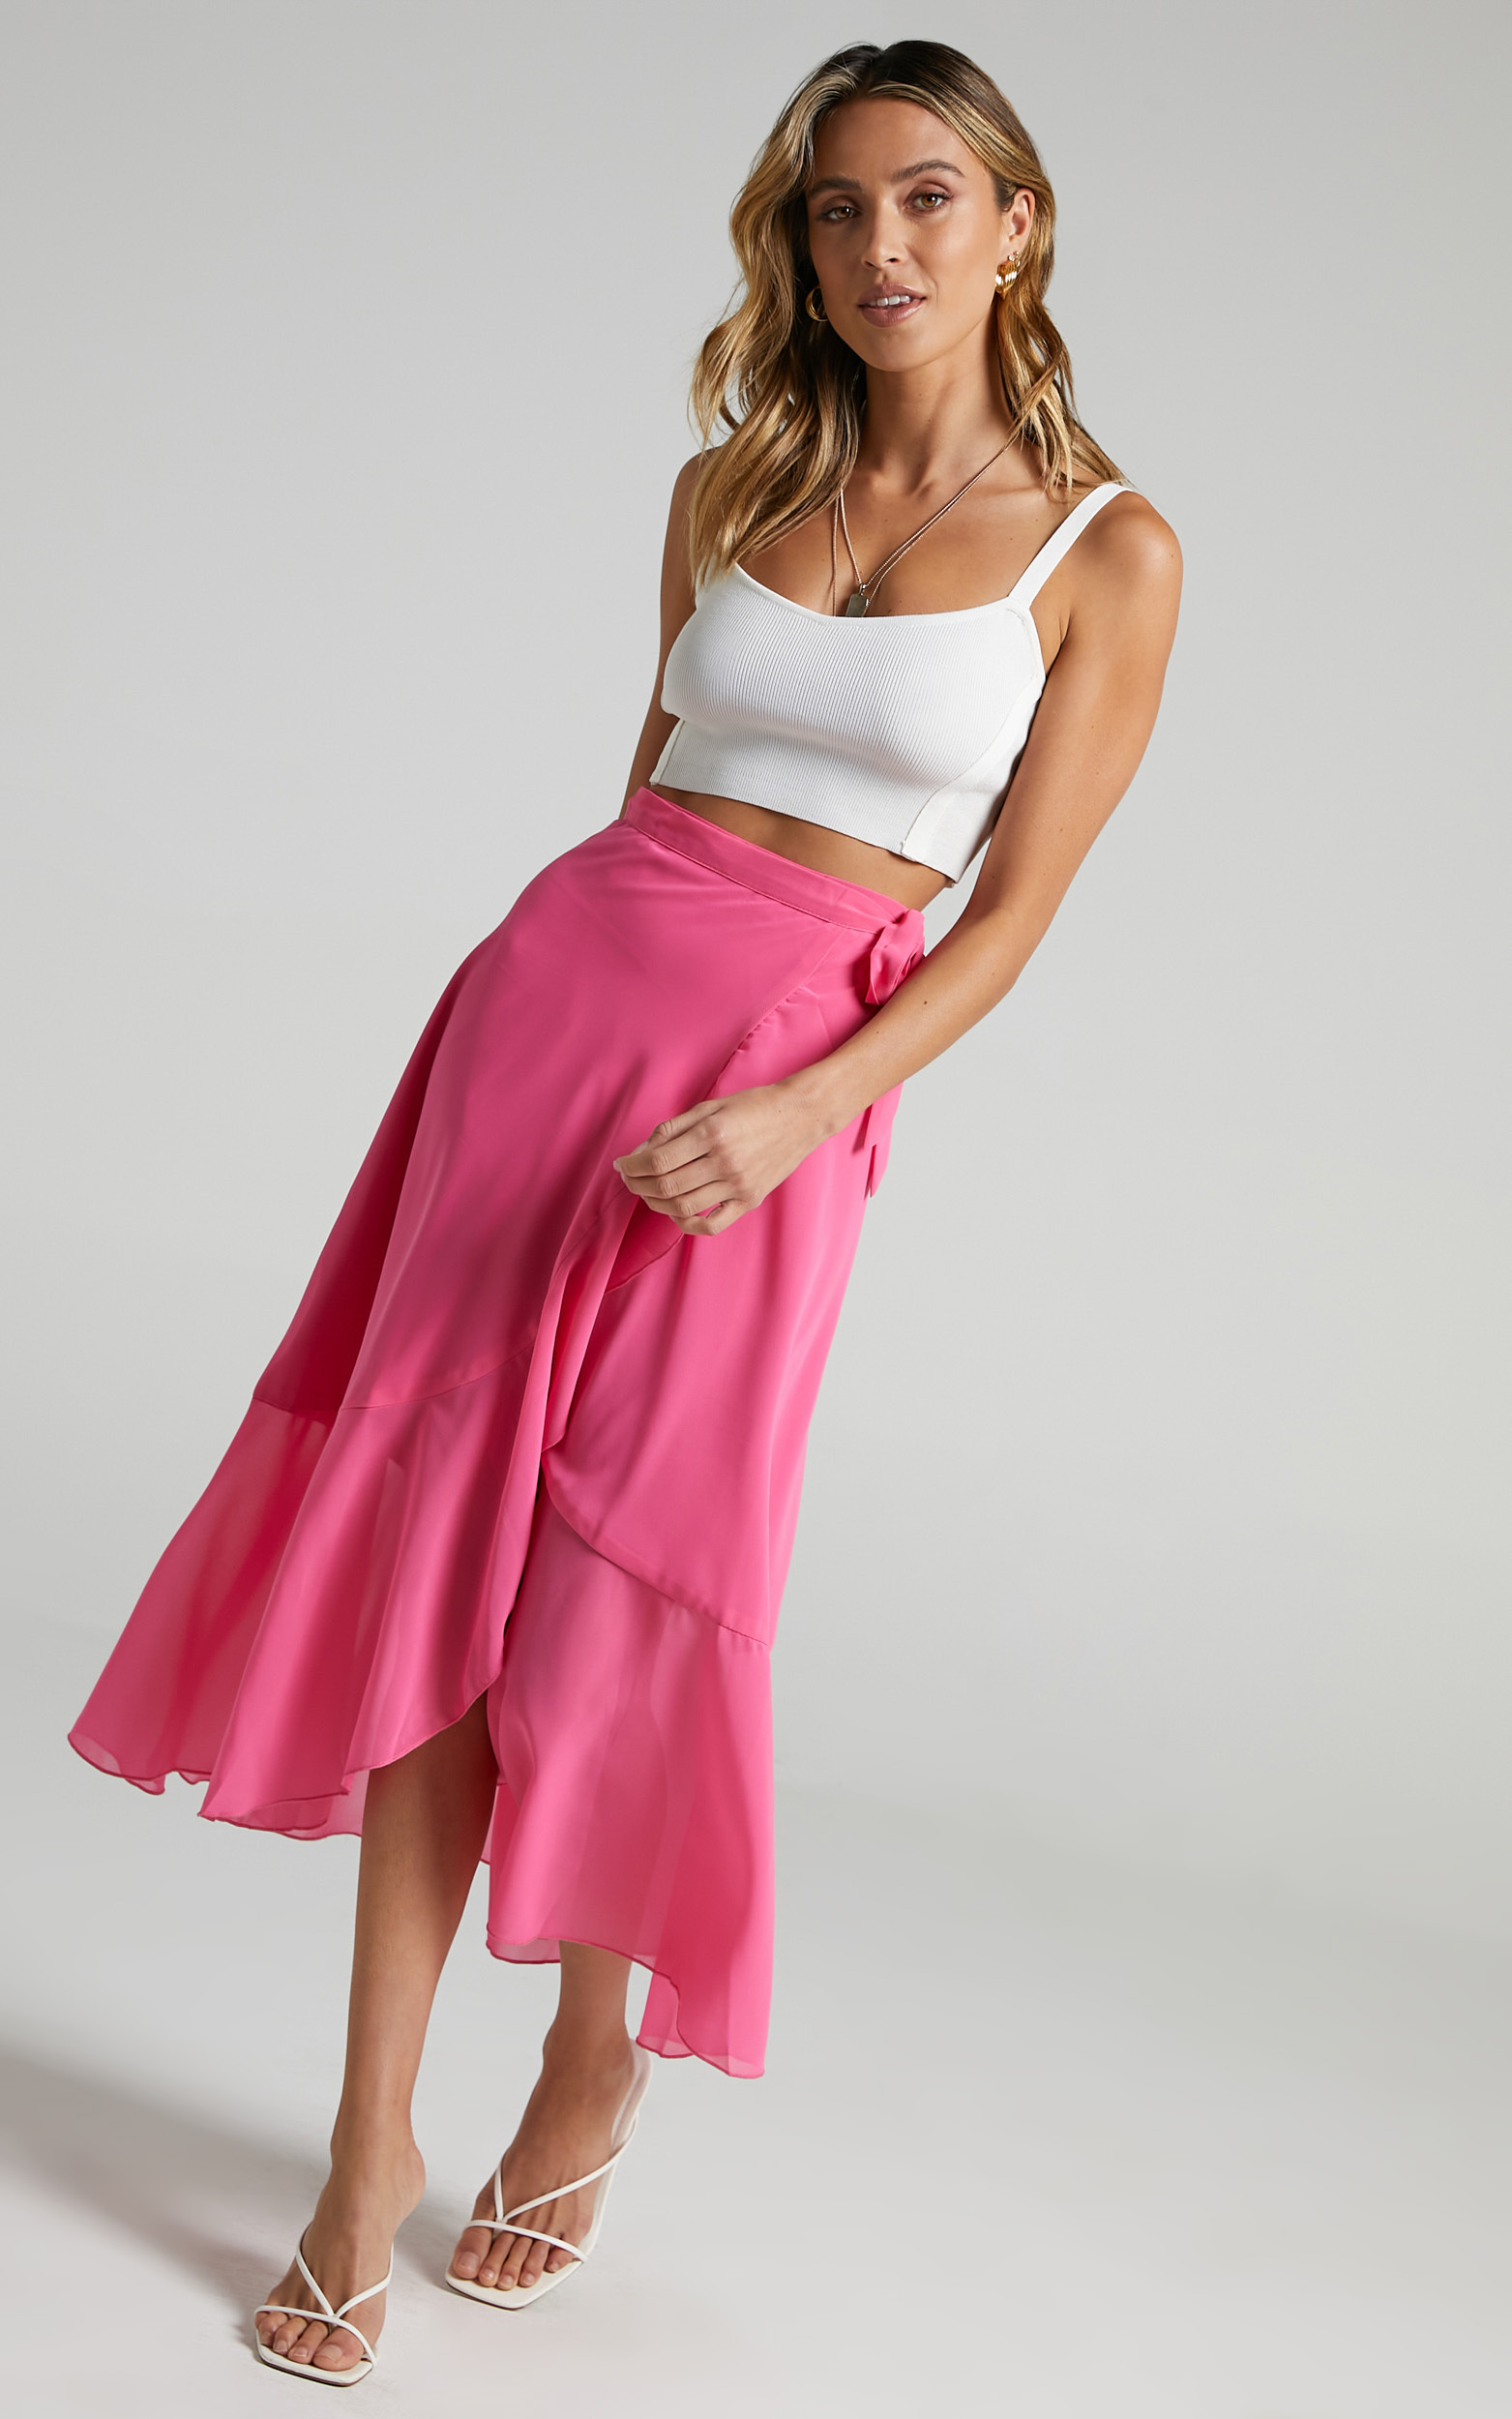 Add To The Mix Skirt in Hot Pink - 06, PNK2, hi-res image number null